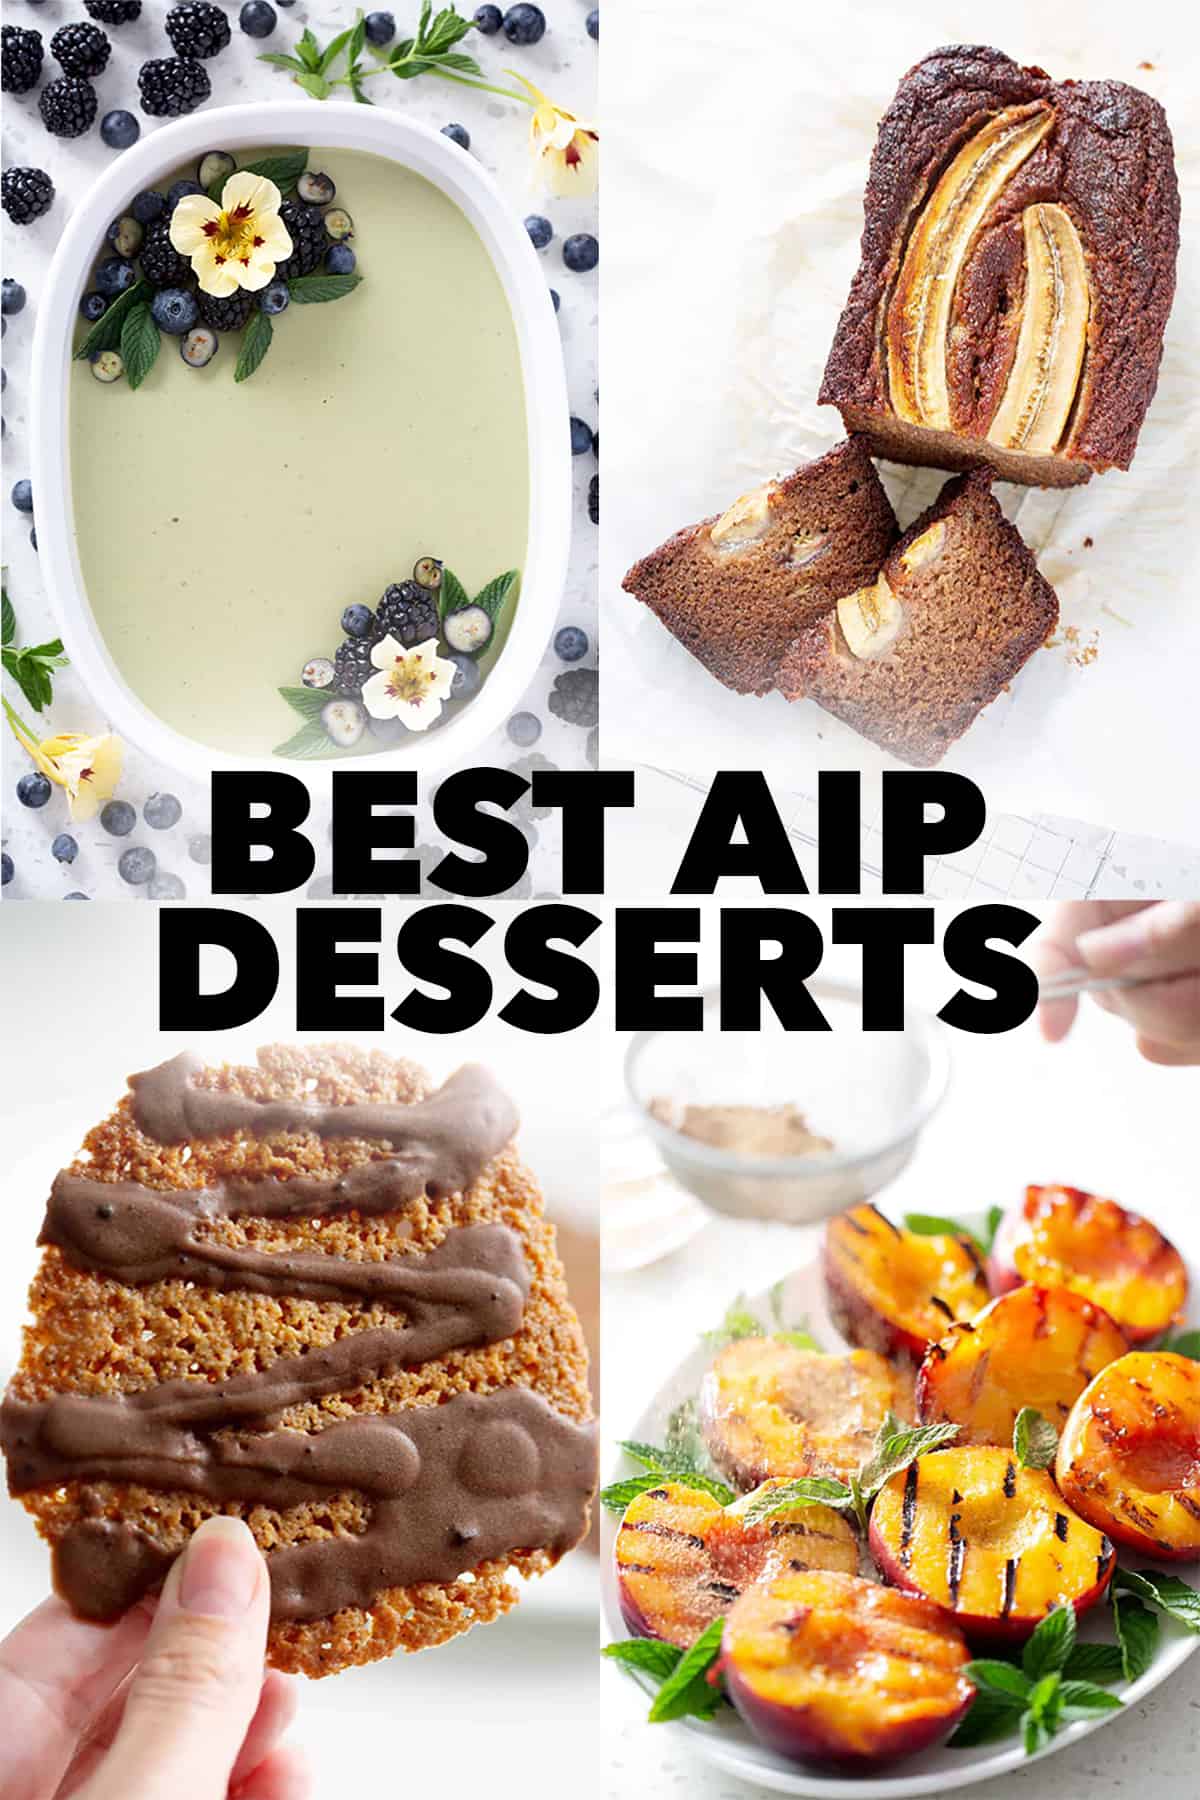 pictures of the best AIP desserts 